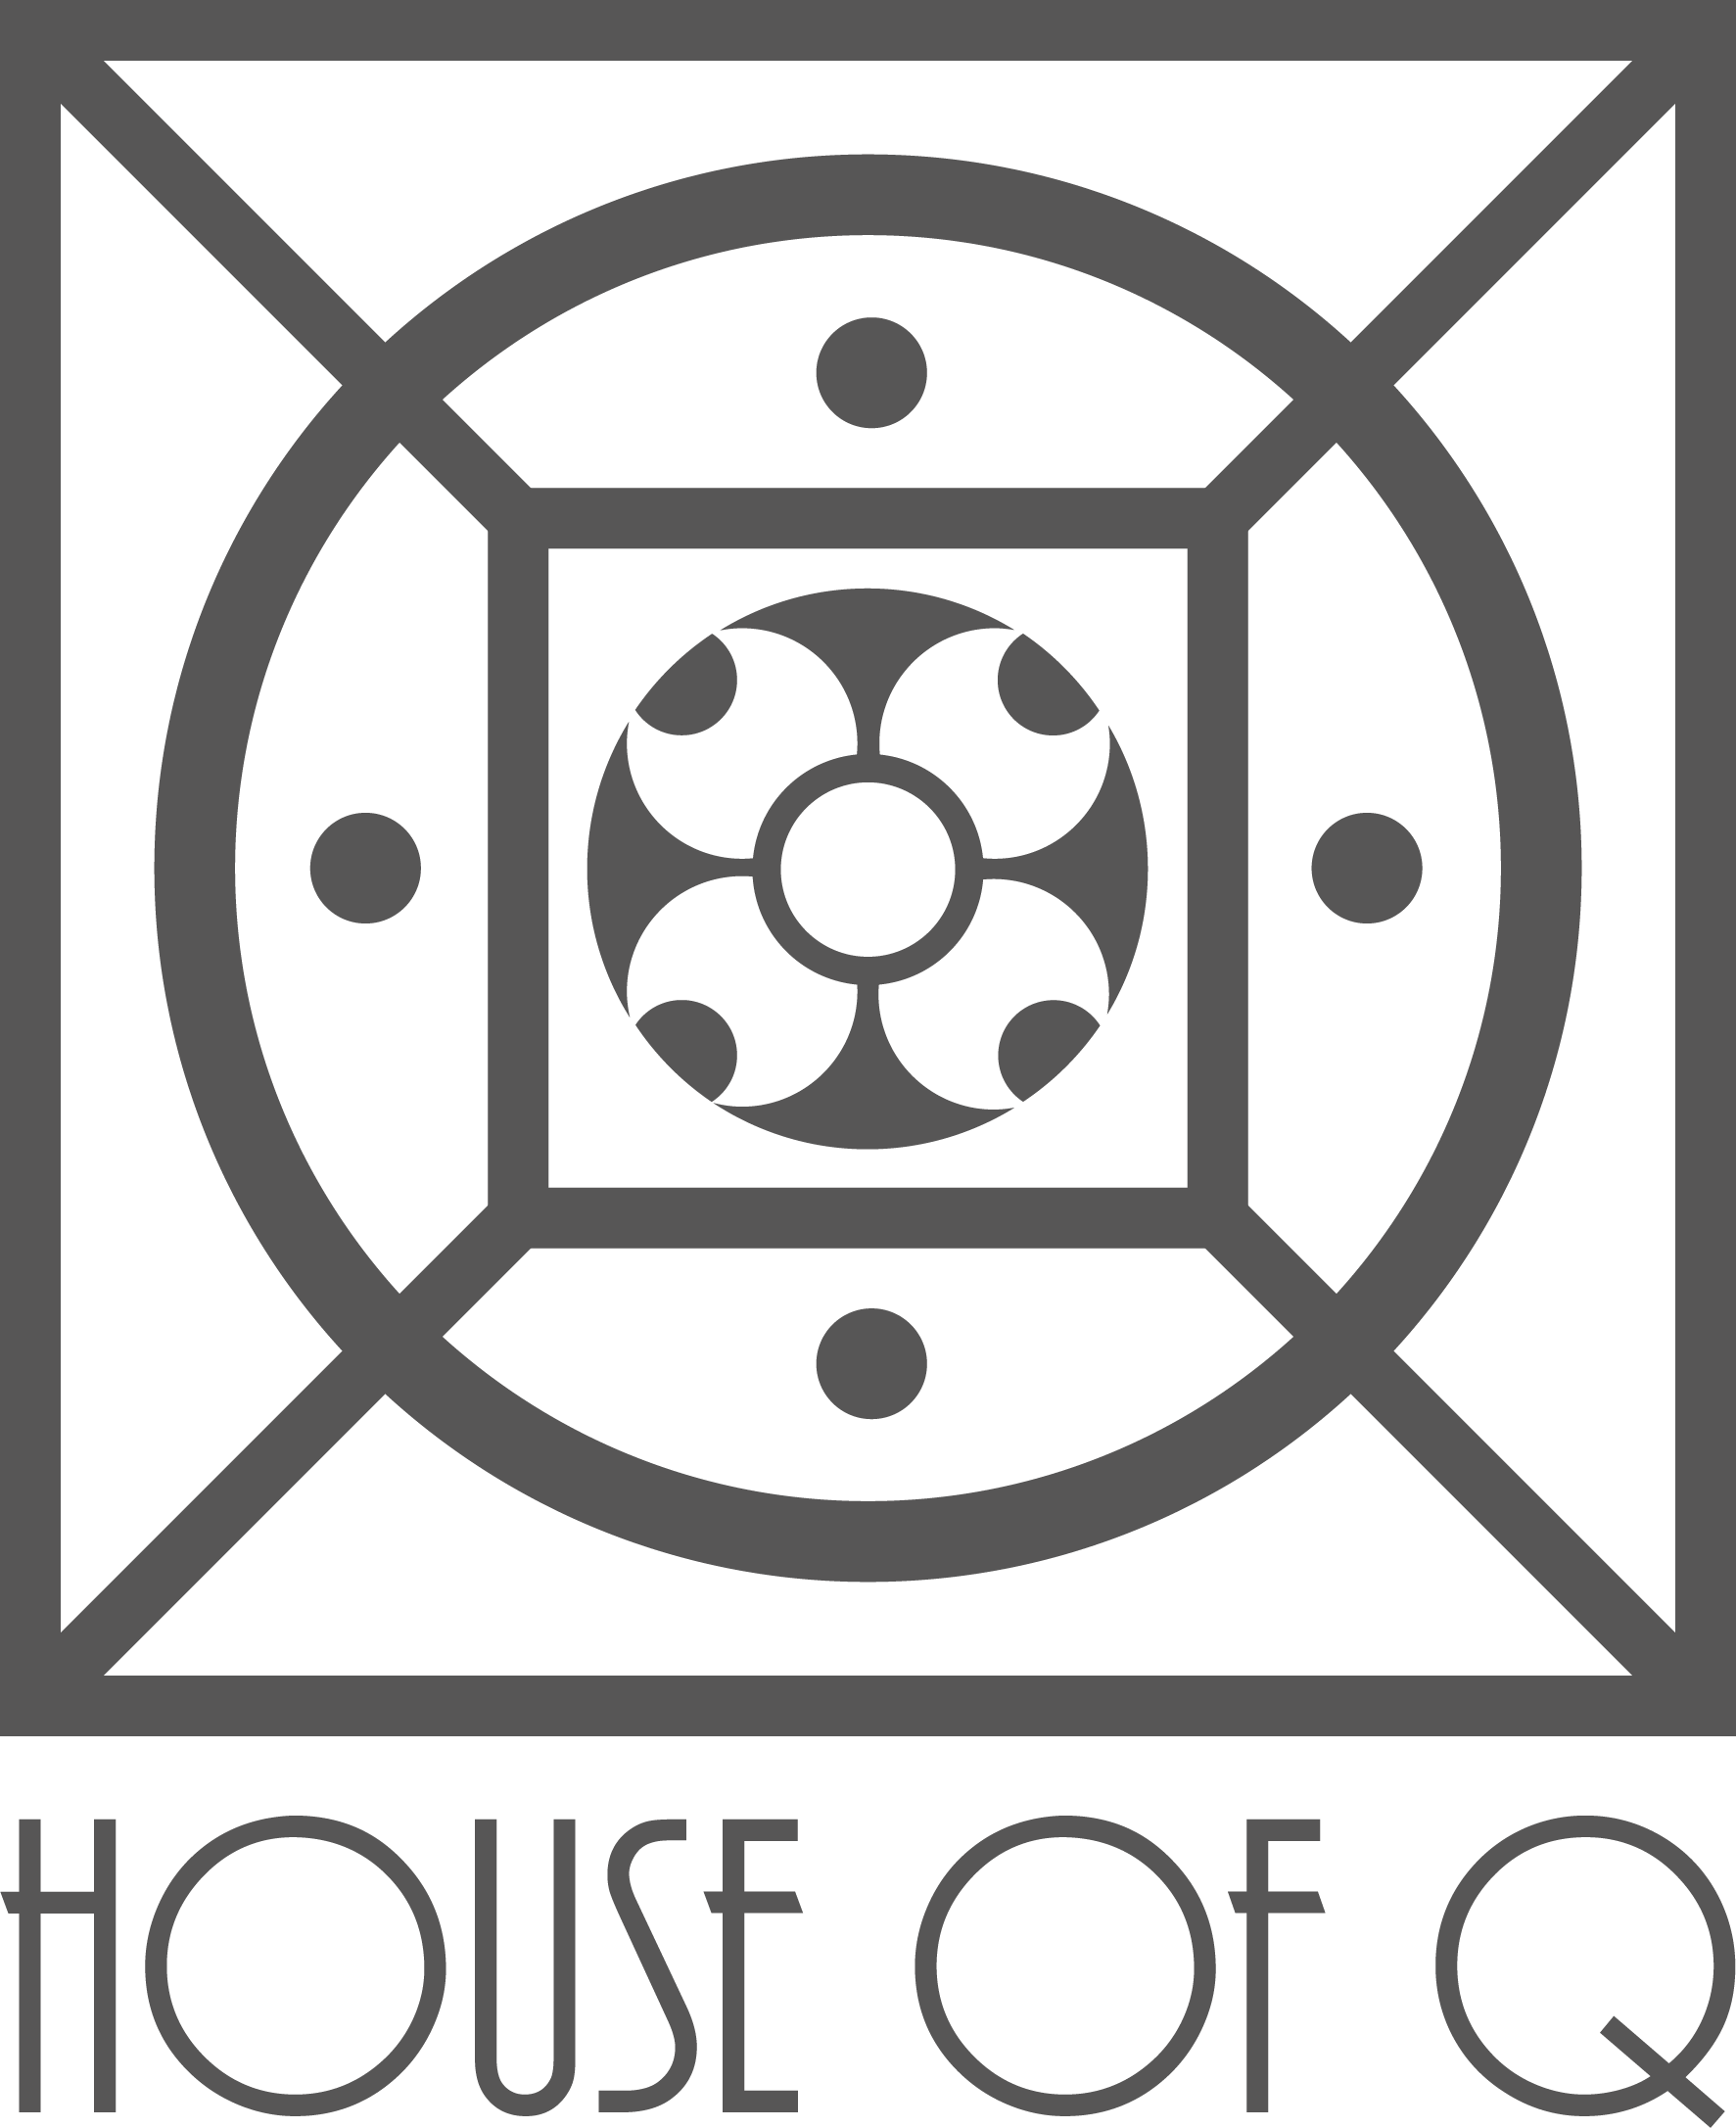 House Of Q Welcome Your Choice Your Home With House Of Q